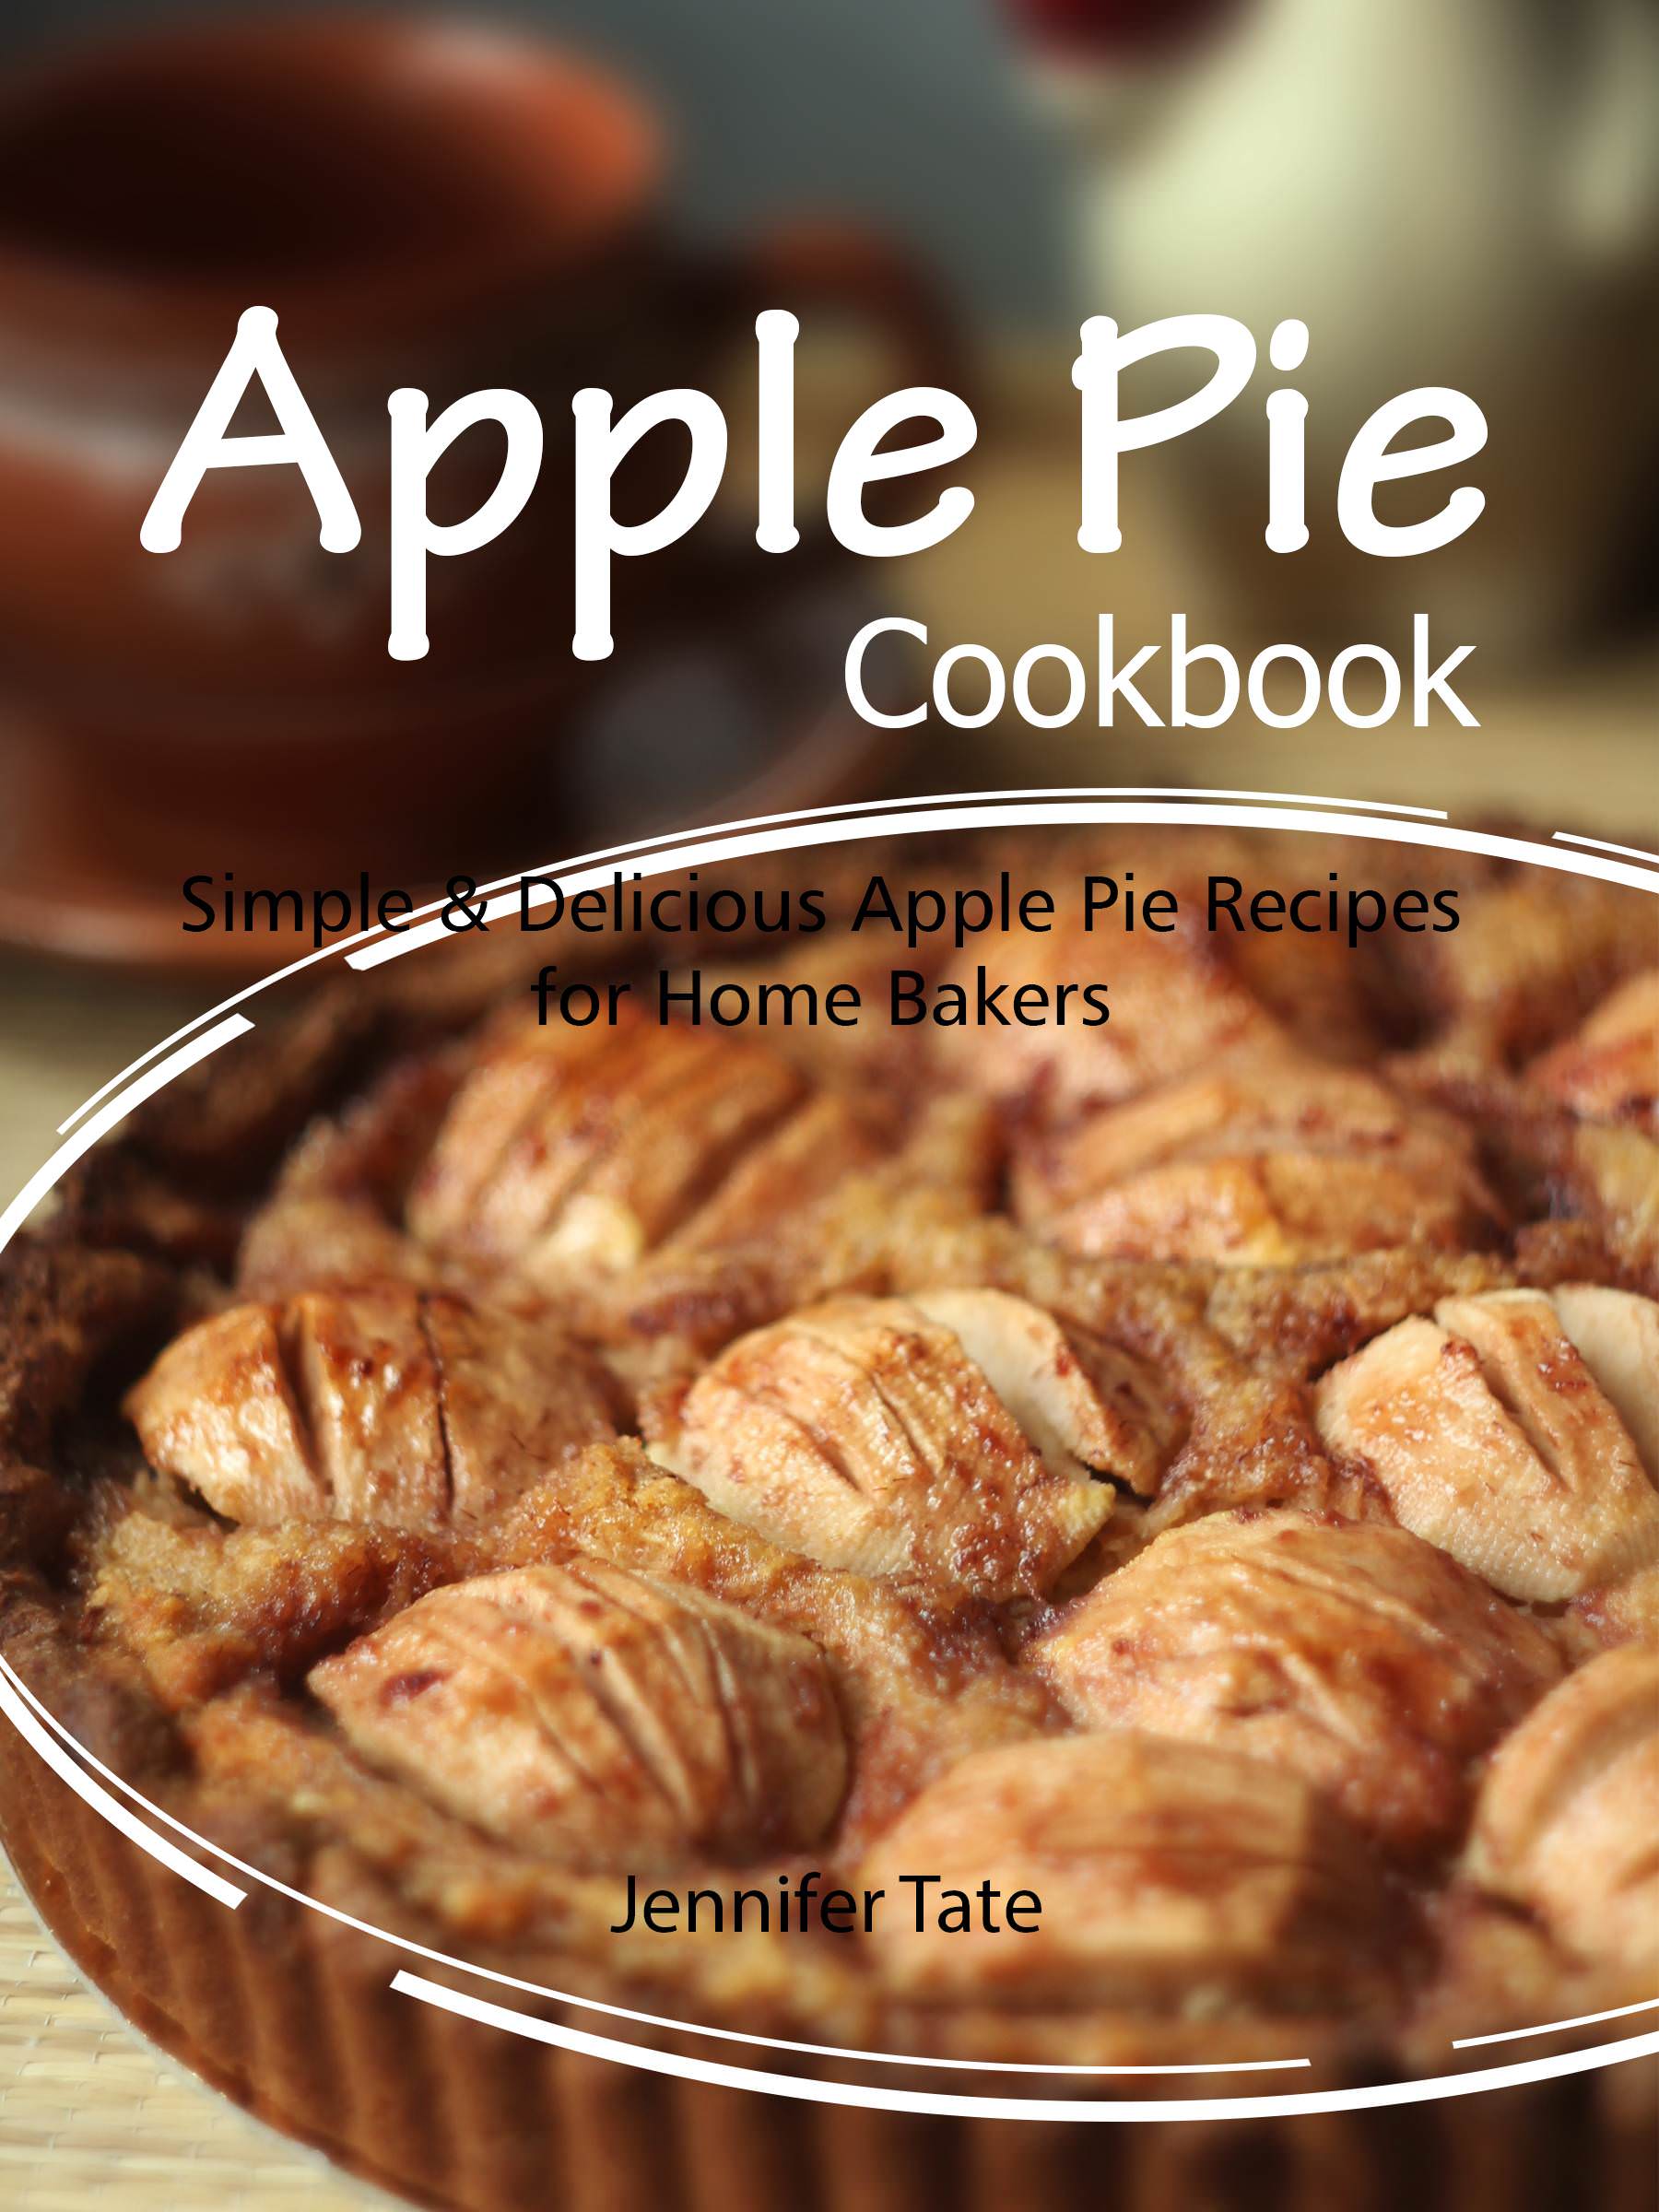 FREE: Apple Pie Cookbook: Simple & Delicious Apple Pie Recipes for Home Bakers by Jennifer Tate